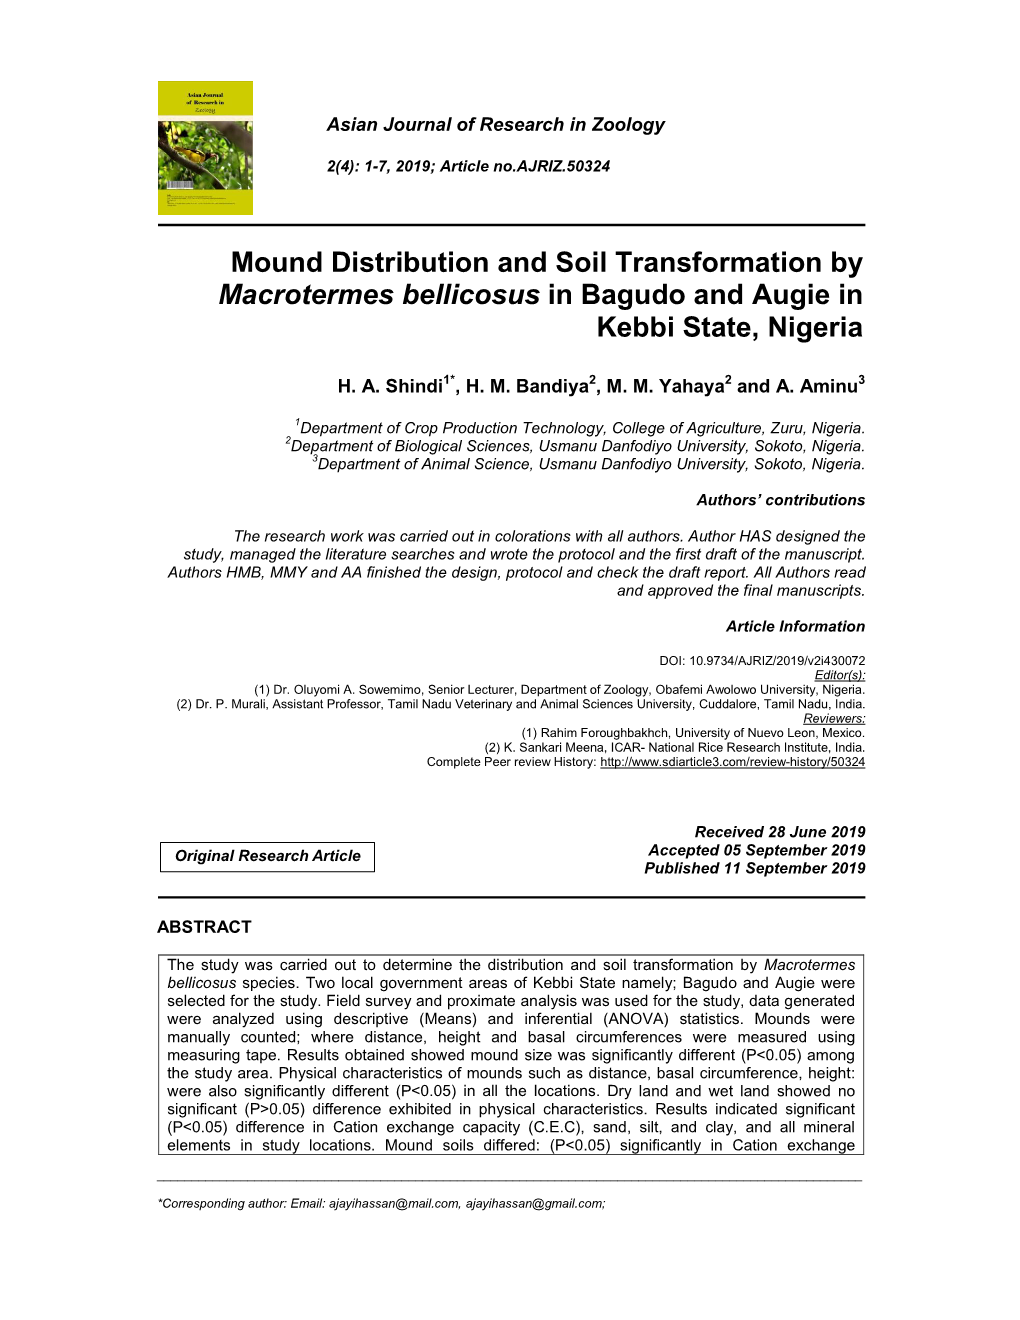 Mound Distribution and Soil Transformation by Macrotermes Bellicosus in Bagudo and Augie in Kebbi State, Nigeria